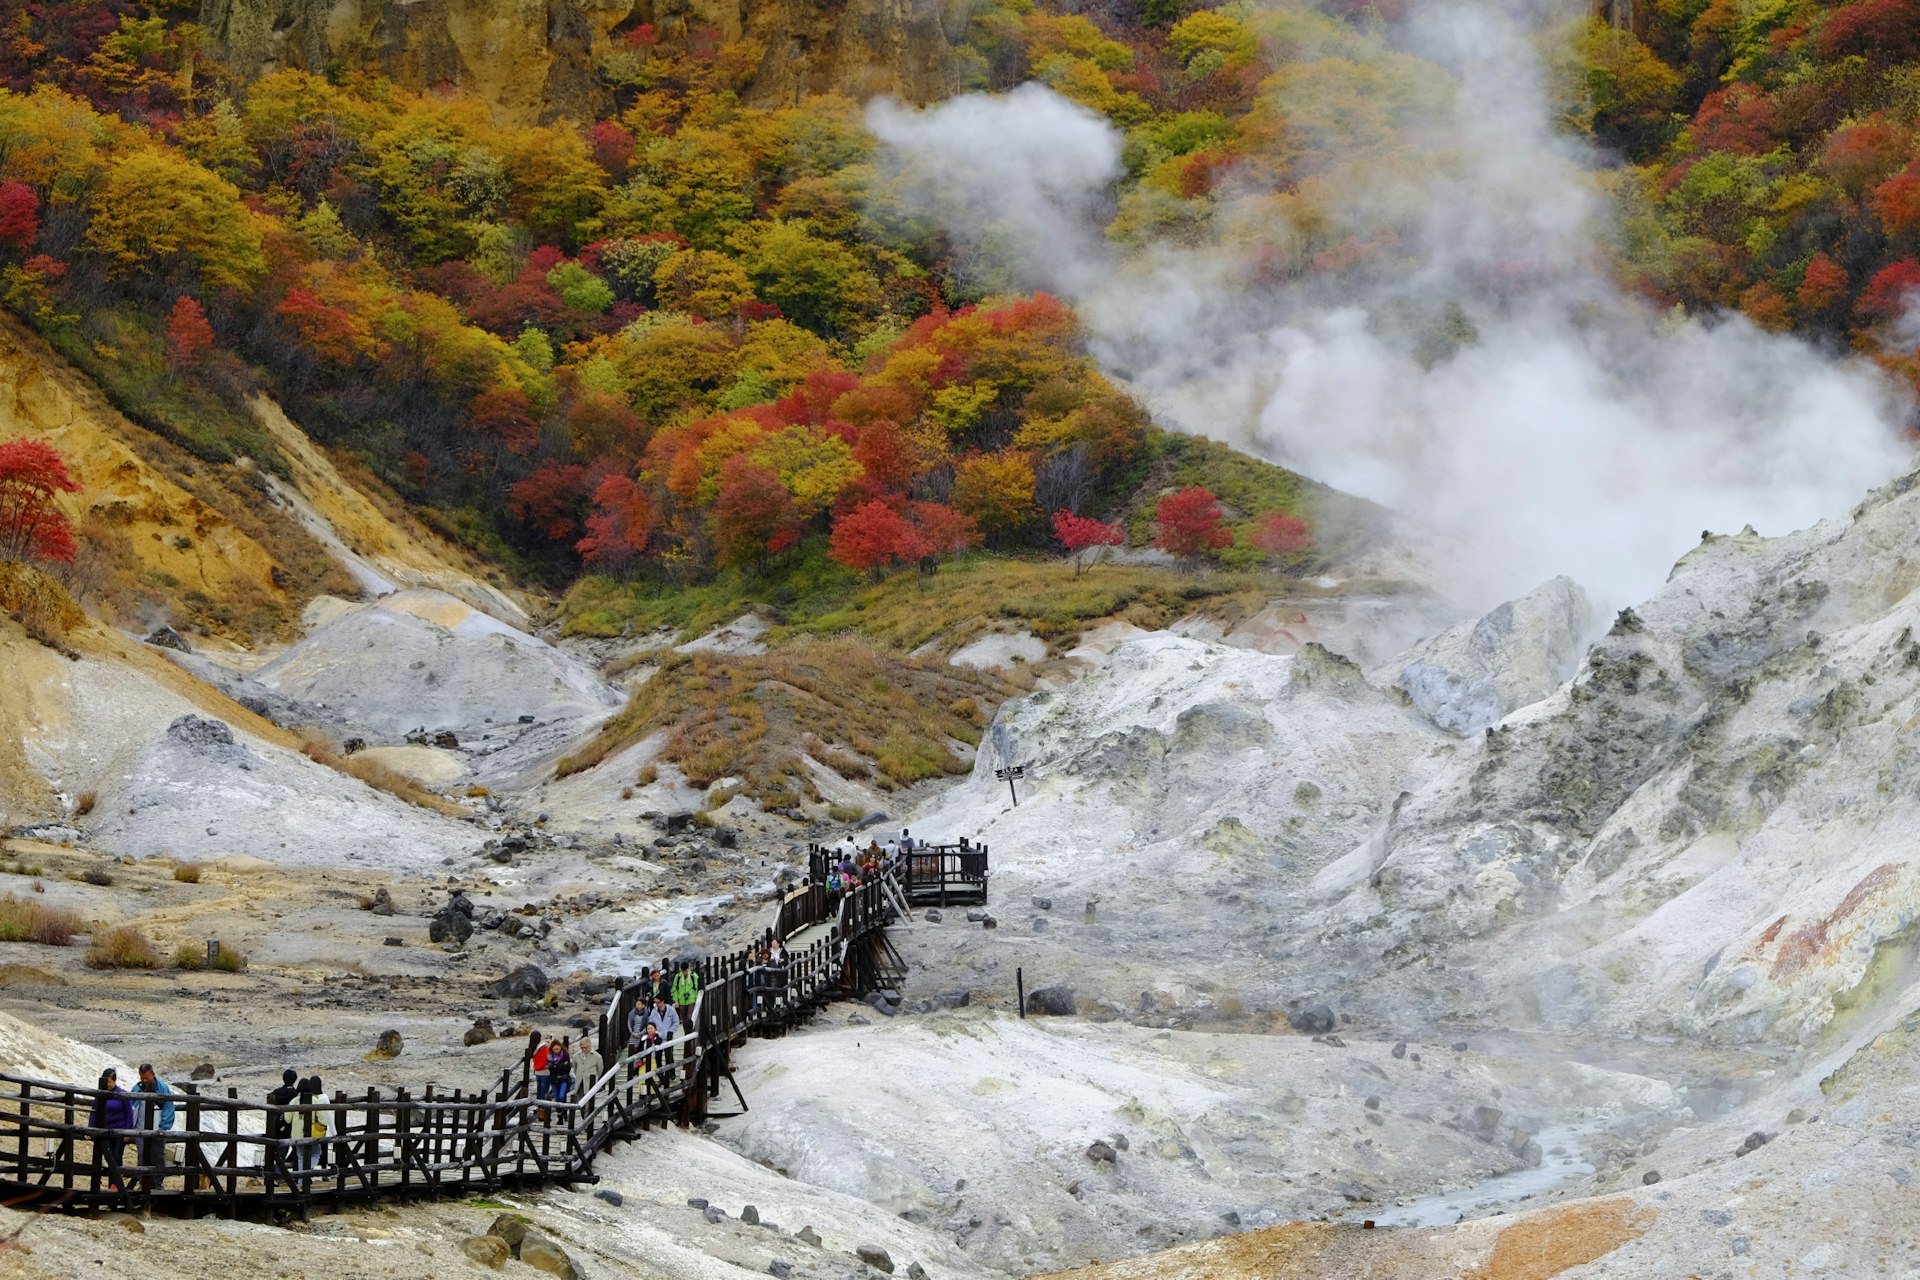 Steam rises from the ground in a valley in Japan